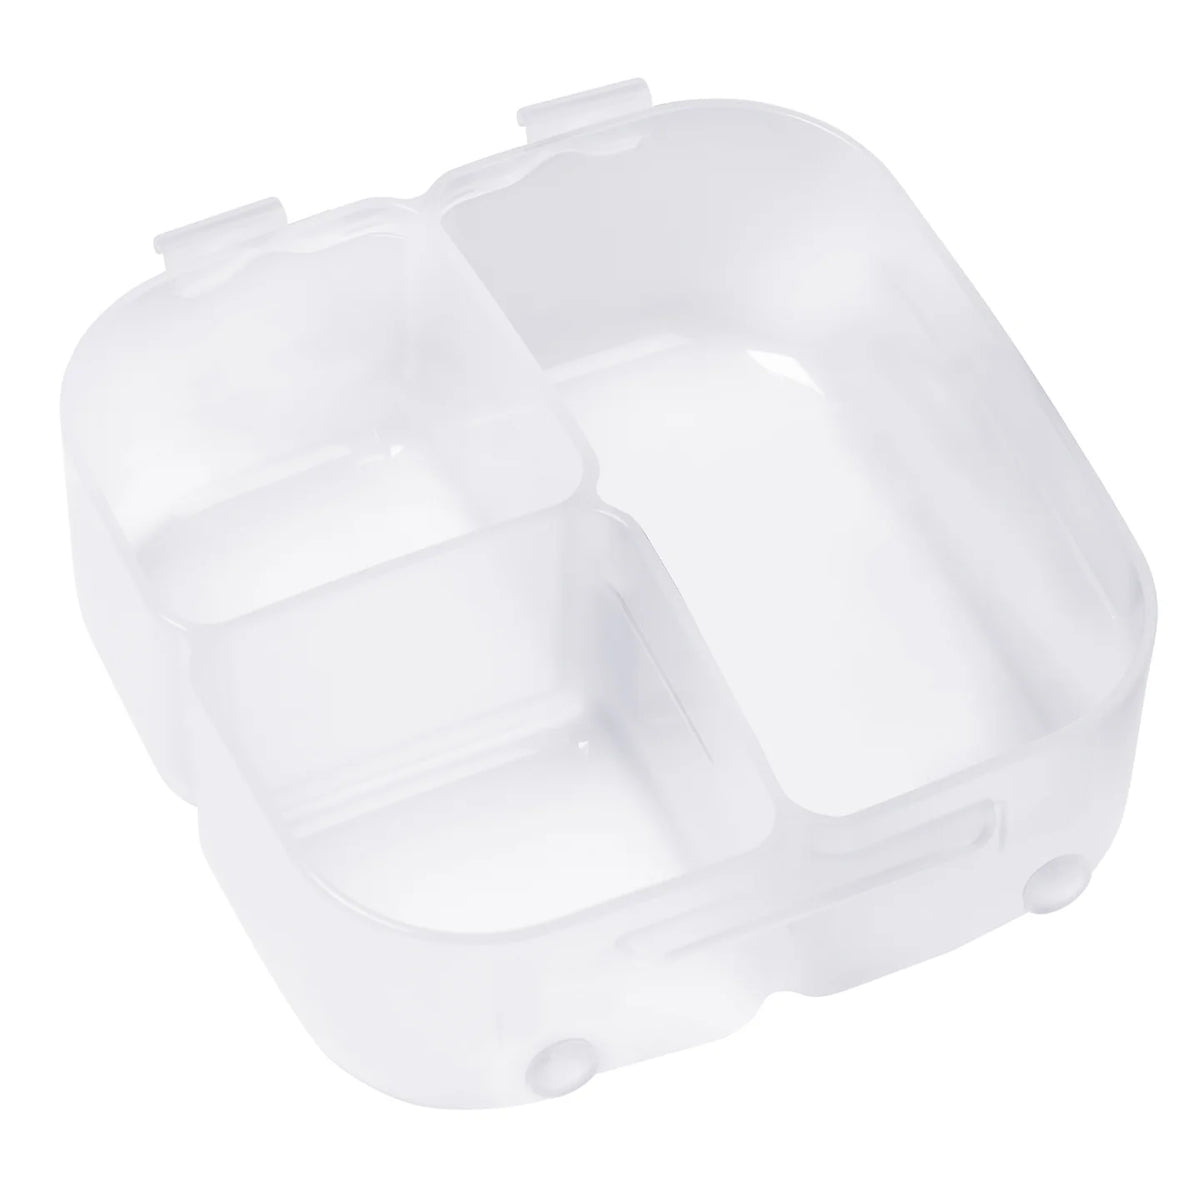 B.Box Lunchbox - Replacement Parts